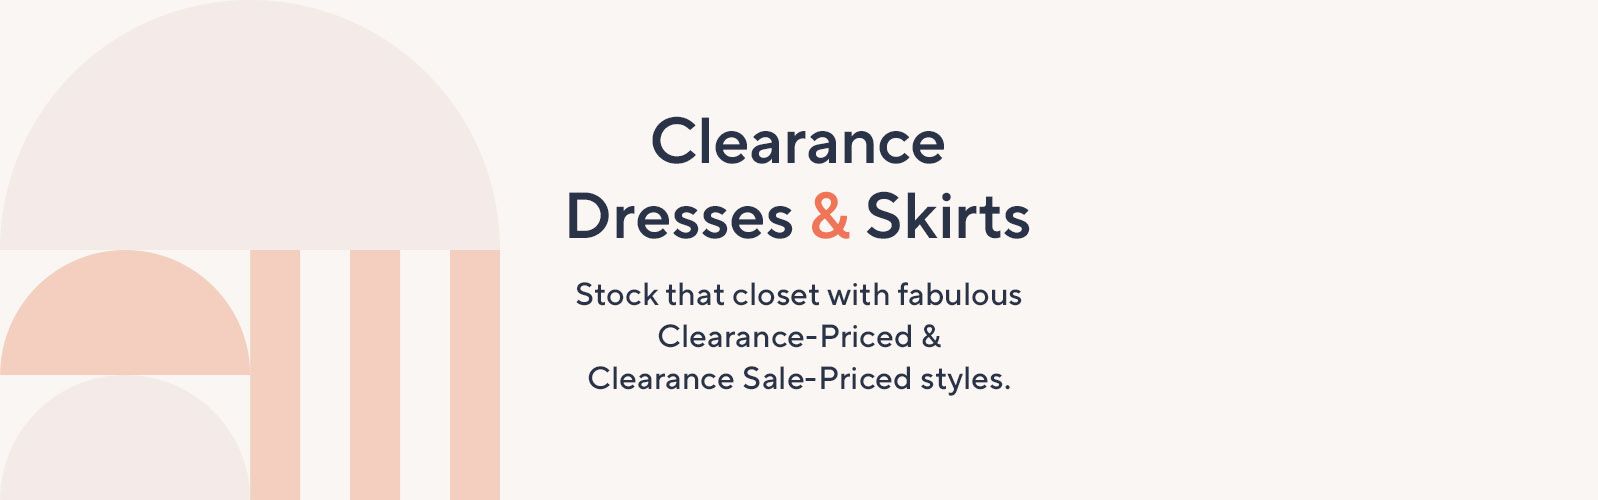 Clearance Dresses & Skirts. Stock that closet with fabulous Clearance-Priced & Clearance Sale-Priced styles.